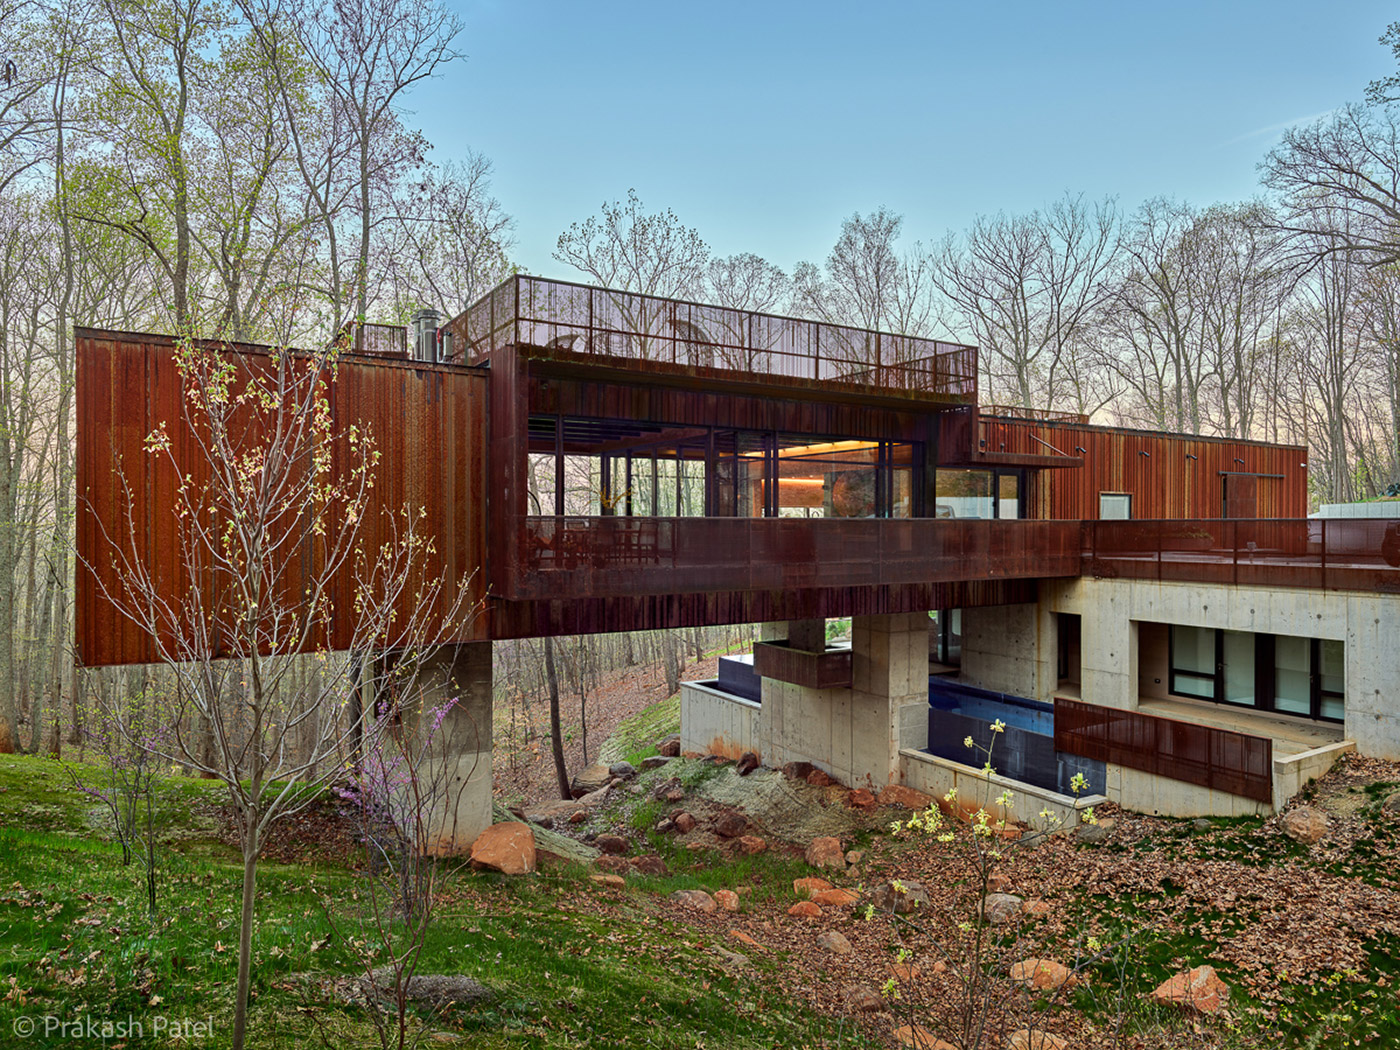 View of Corten Rusted Steel Perforated Screens and Ribbed Metal Siding at Modern Bridge House Spanning Ravine on Concrete Piers by Best Charlottesville Architects HEDS Designed by Allison Ewing.